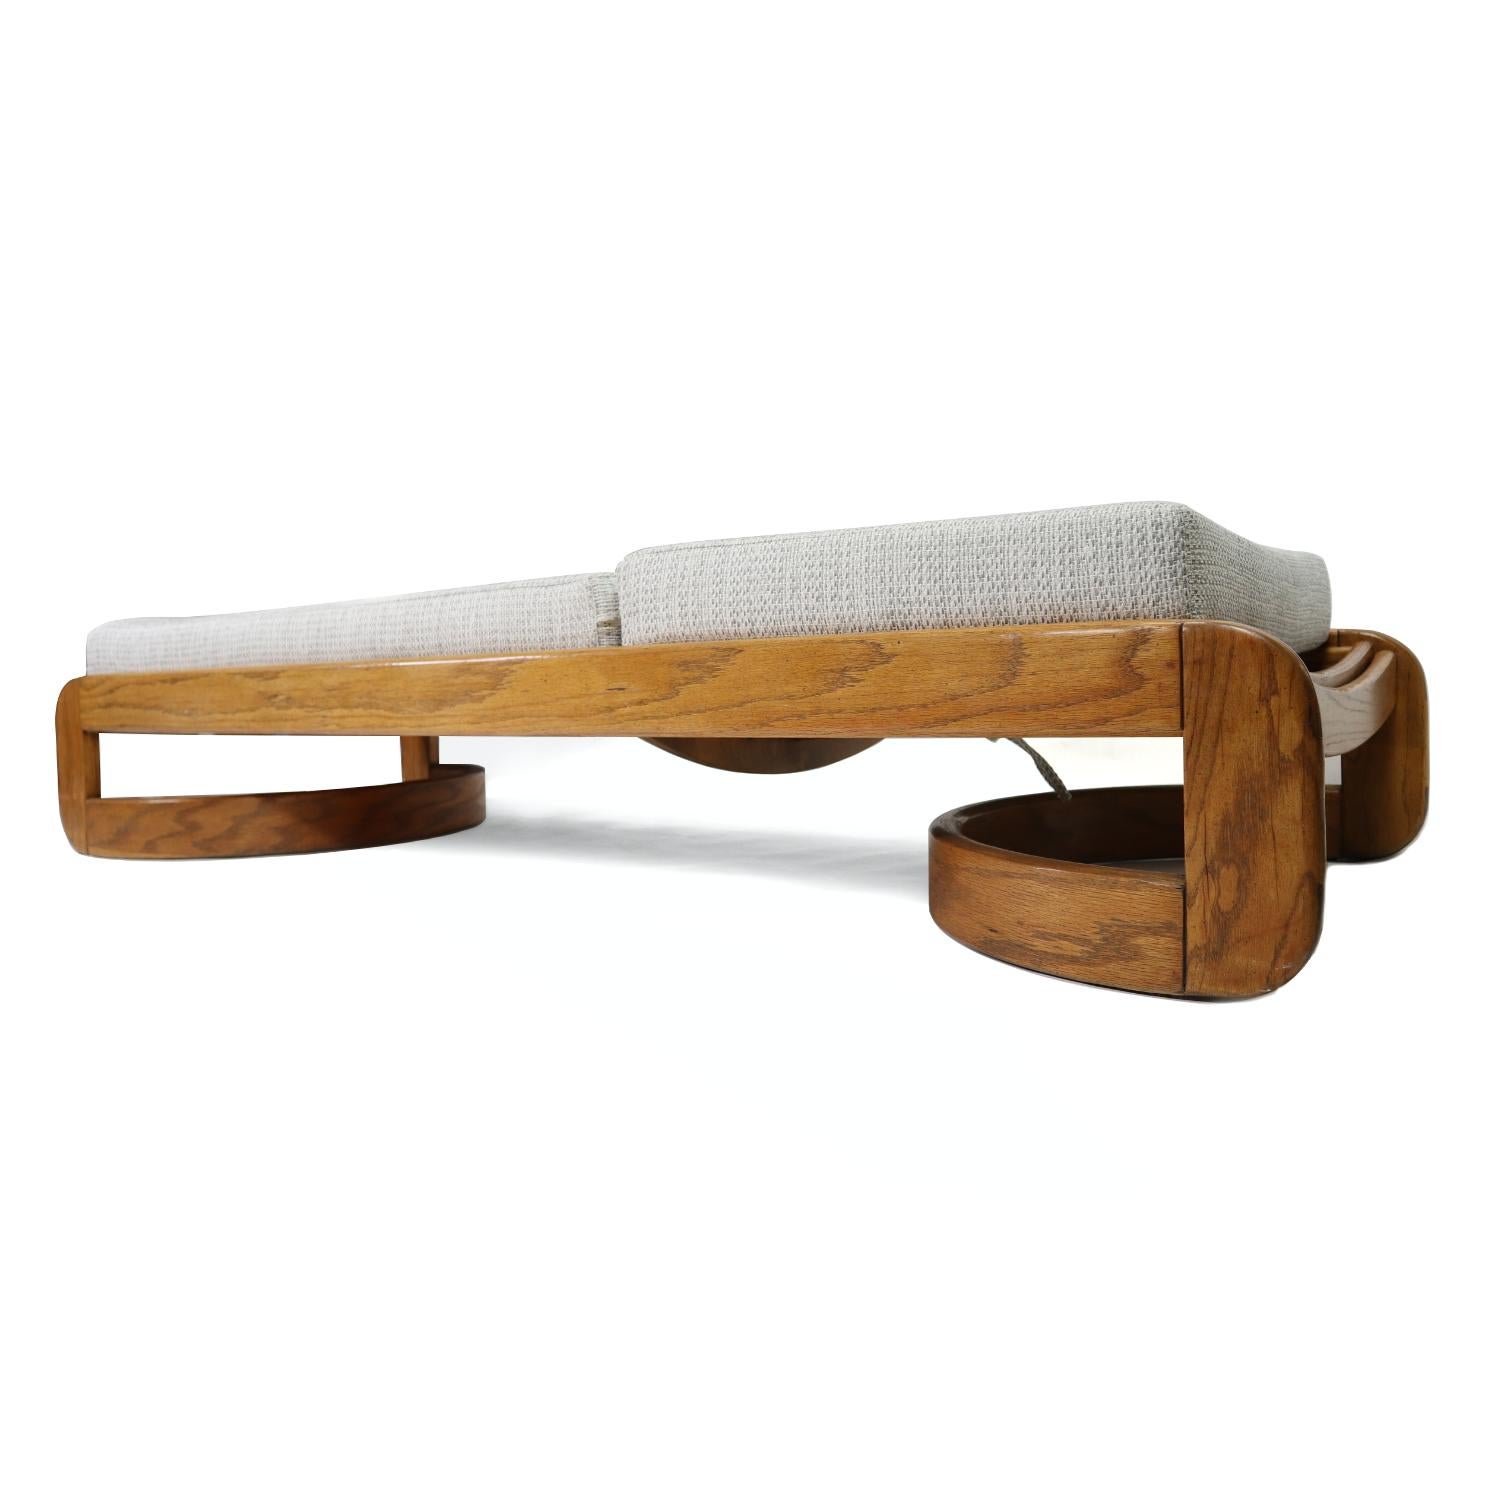 Fabric Howard Mid-Century Modern Restored Adjustable Chaise Lounge Daybed & Side Table